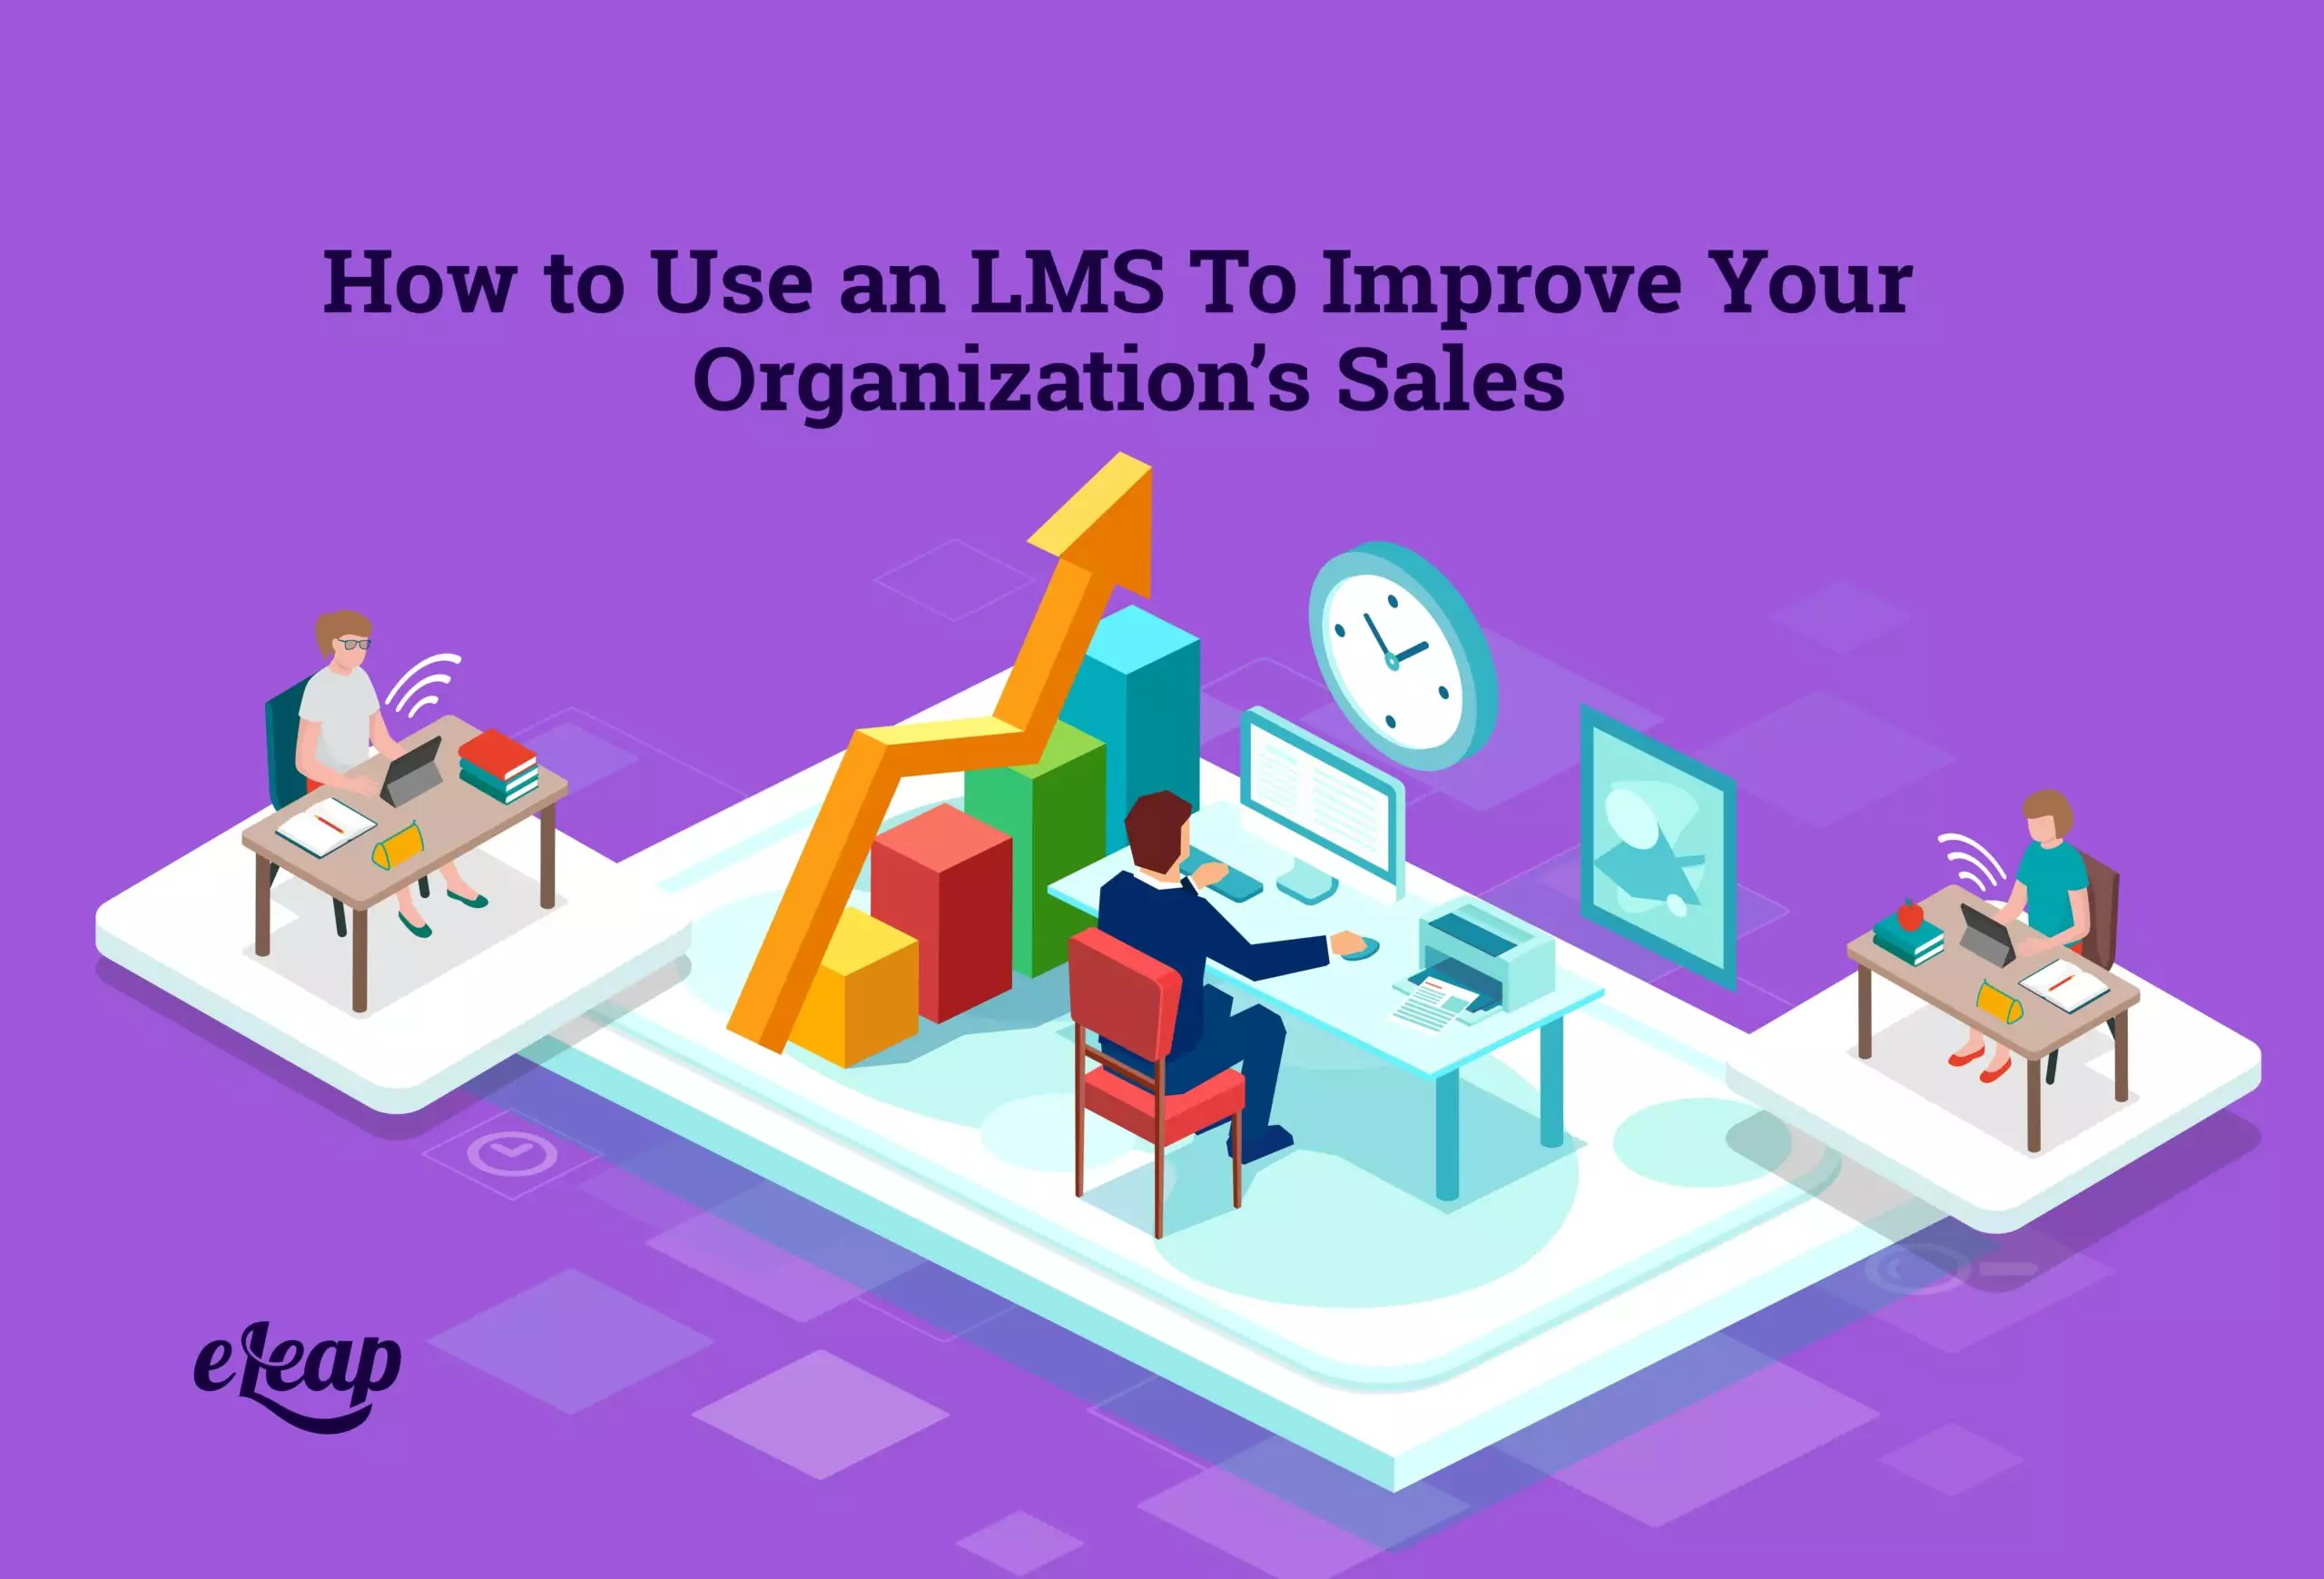 How to Use an LMS To Improve Your Organization’s Sales